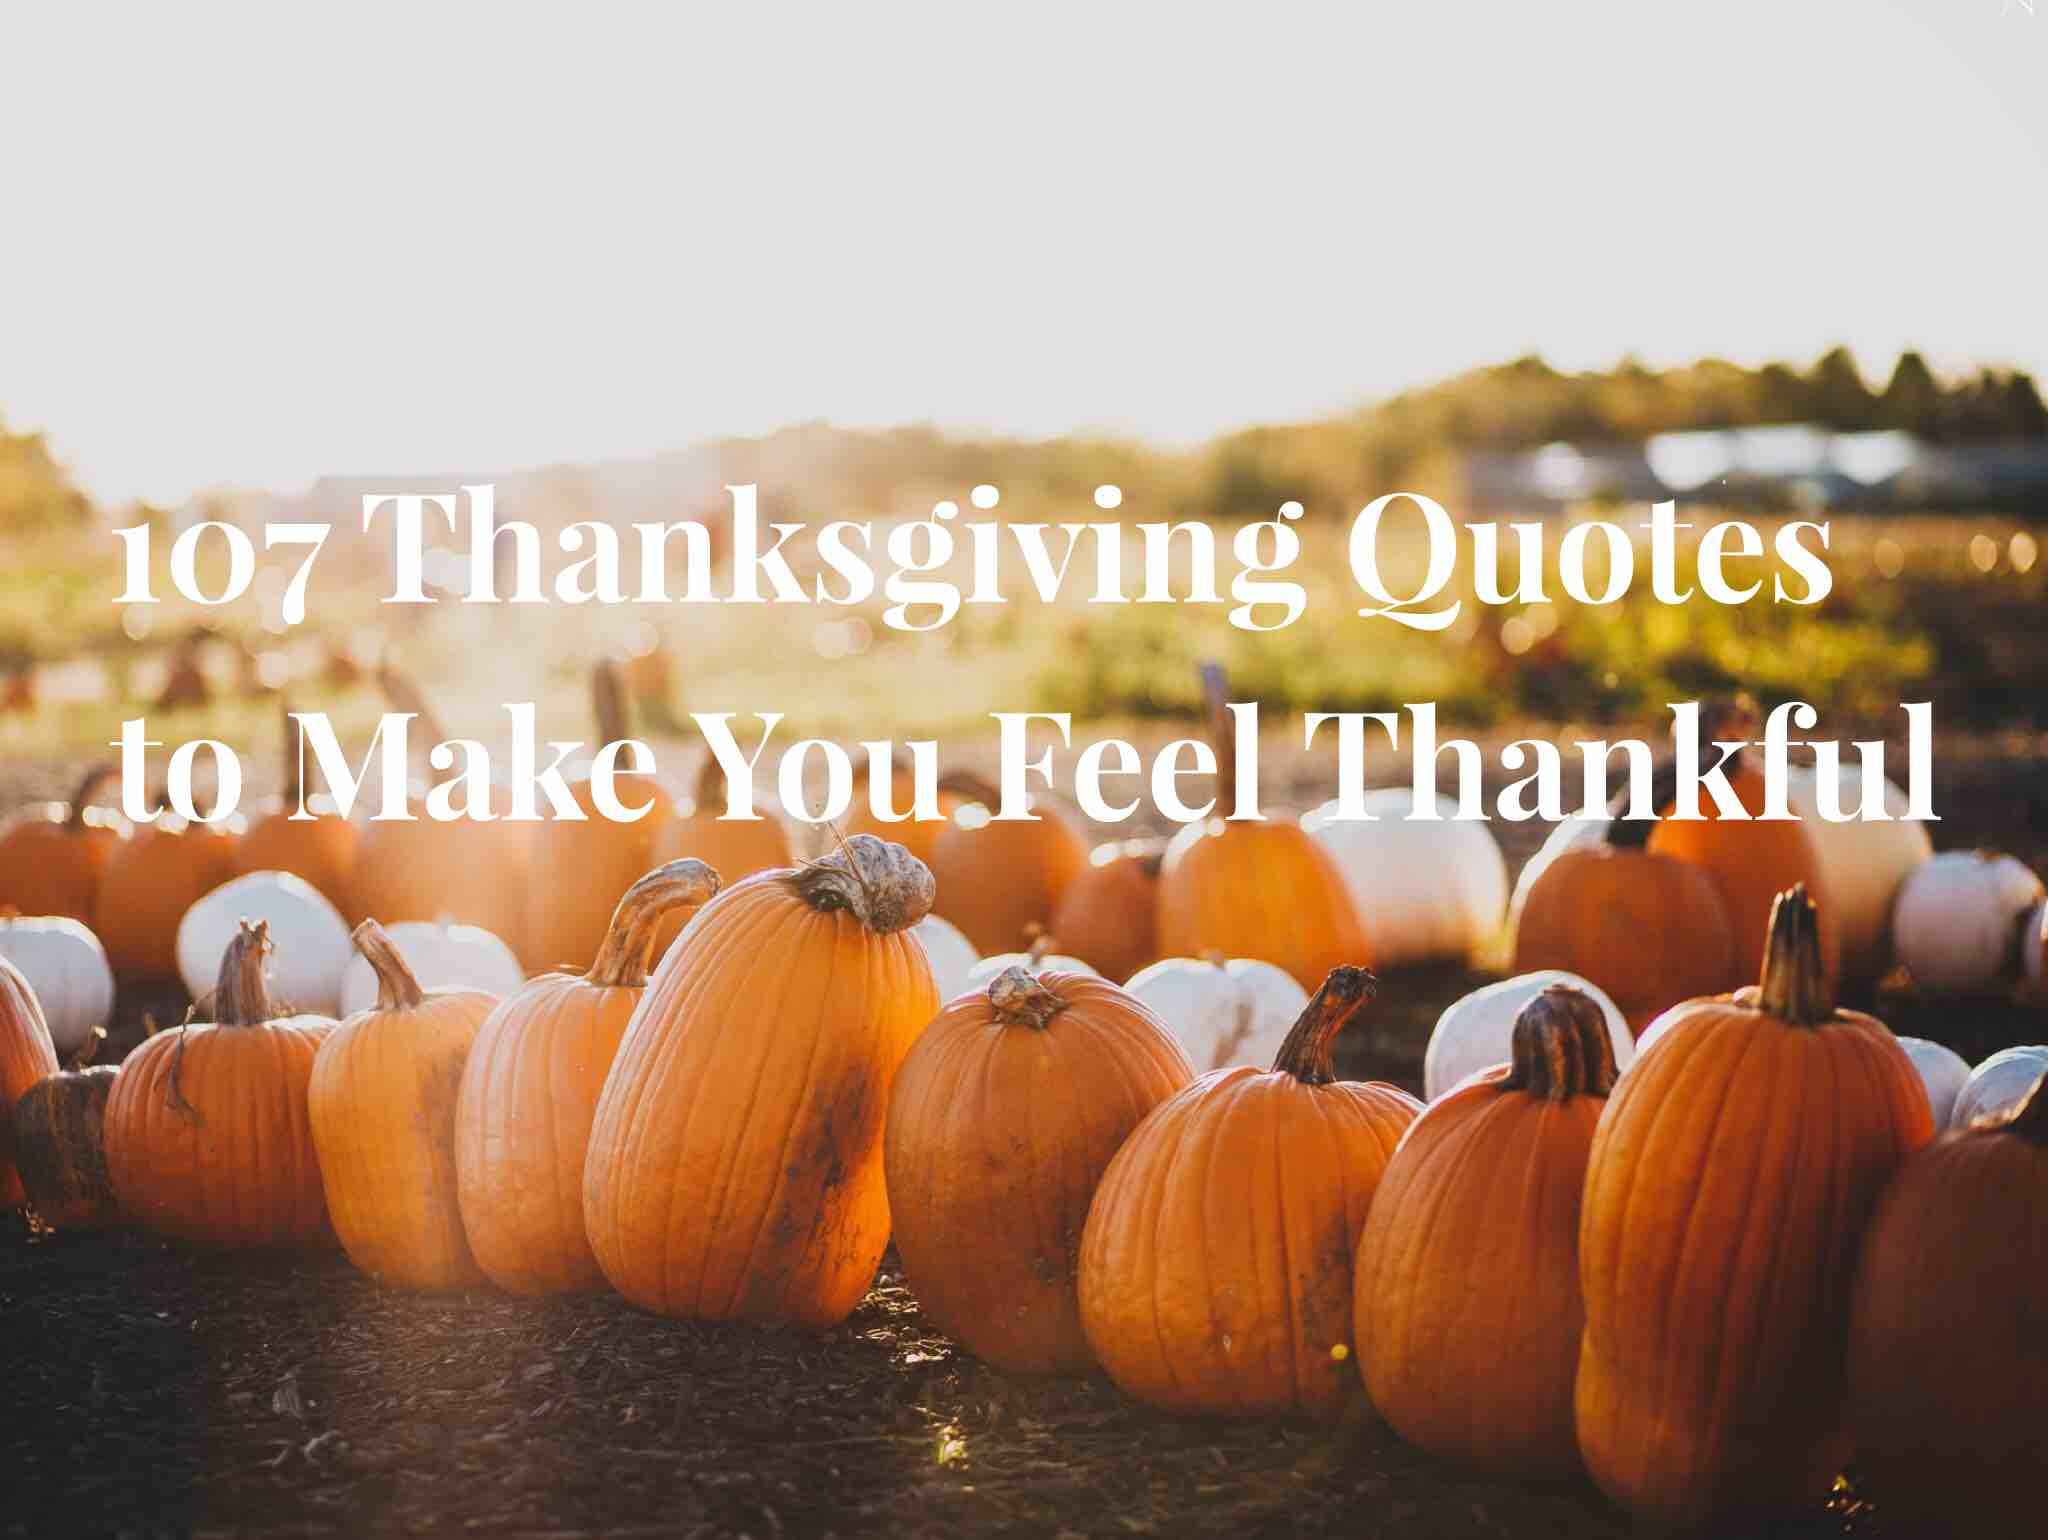 Thanksgiving Quotes Thanksgivingquotes
 107 Thanksgiving Quotes to Make You Feel Thankful